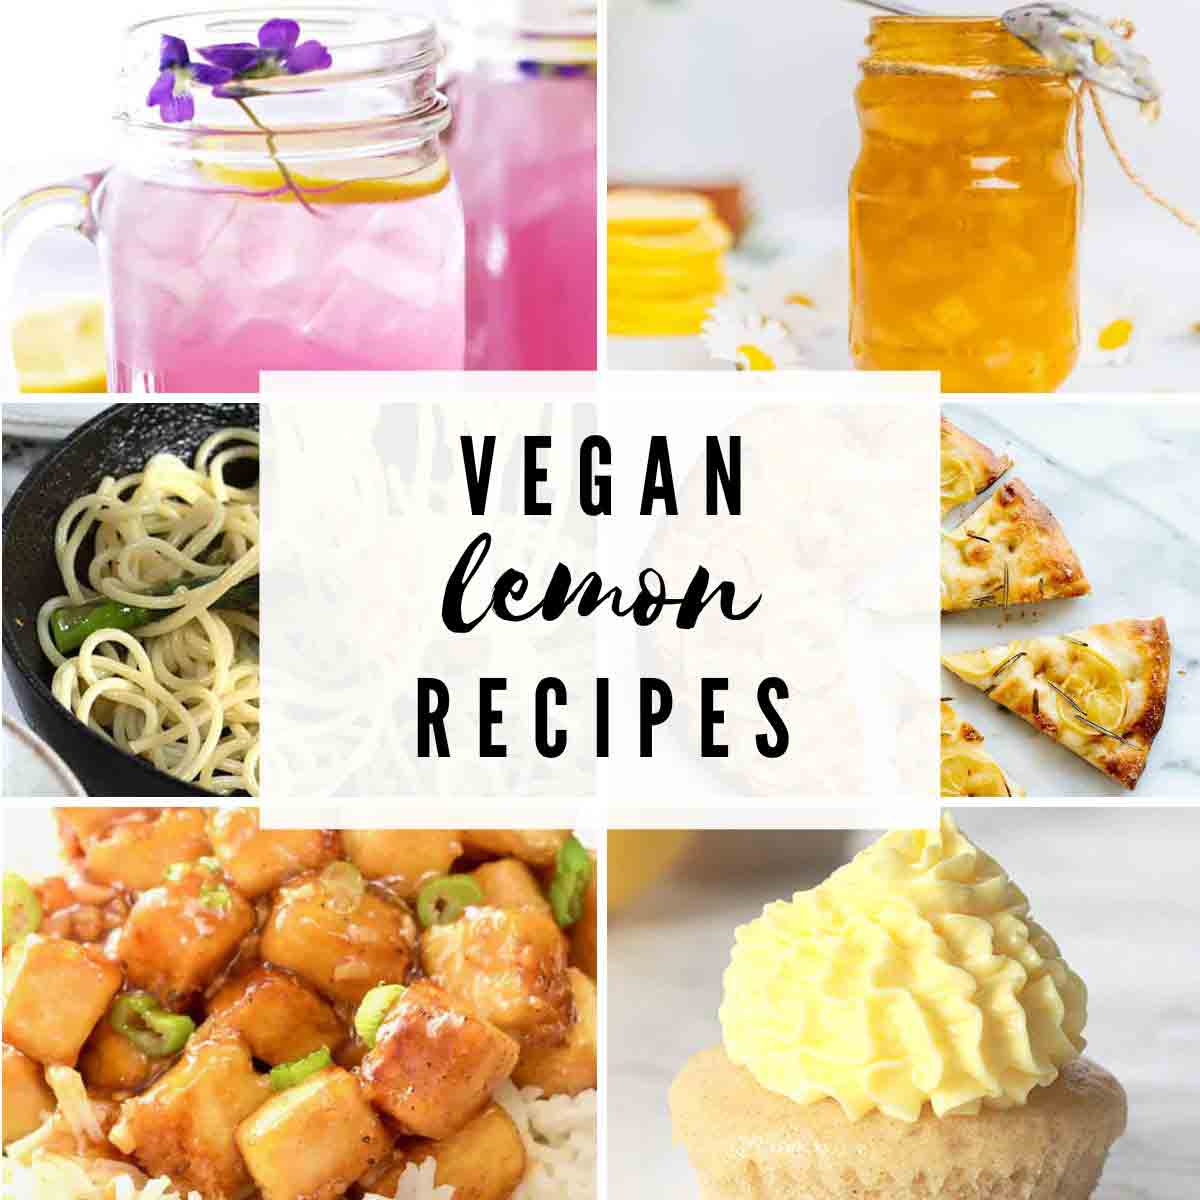 6 Recipe Images With Text Overlay That Reads 'vegan Lemon Recipes'